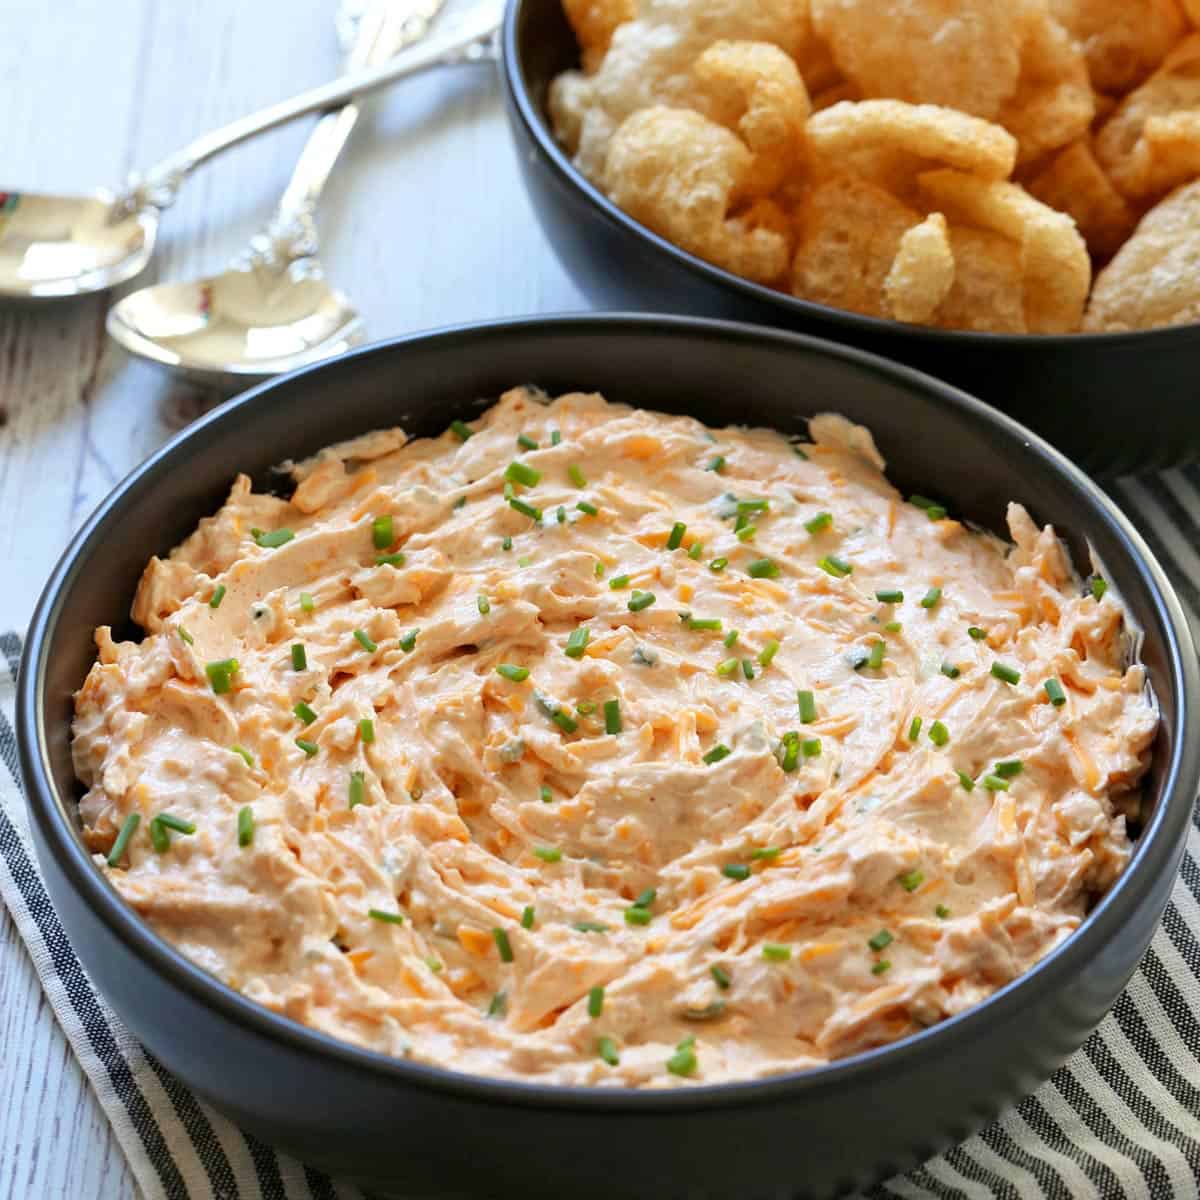 Cream cheese dip is served in a bowl with pork rinds for scooping.